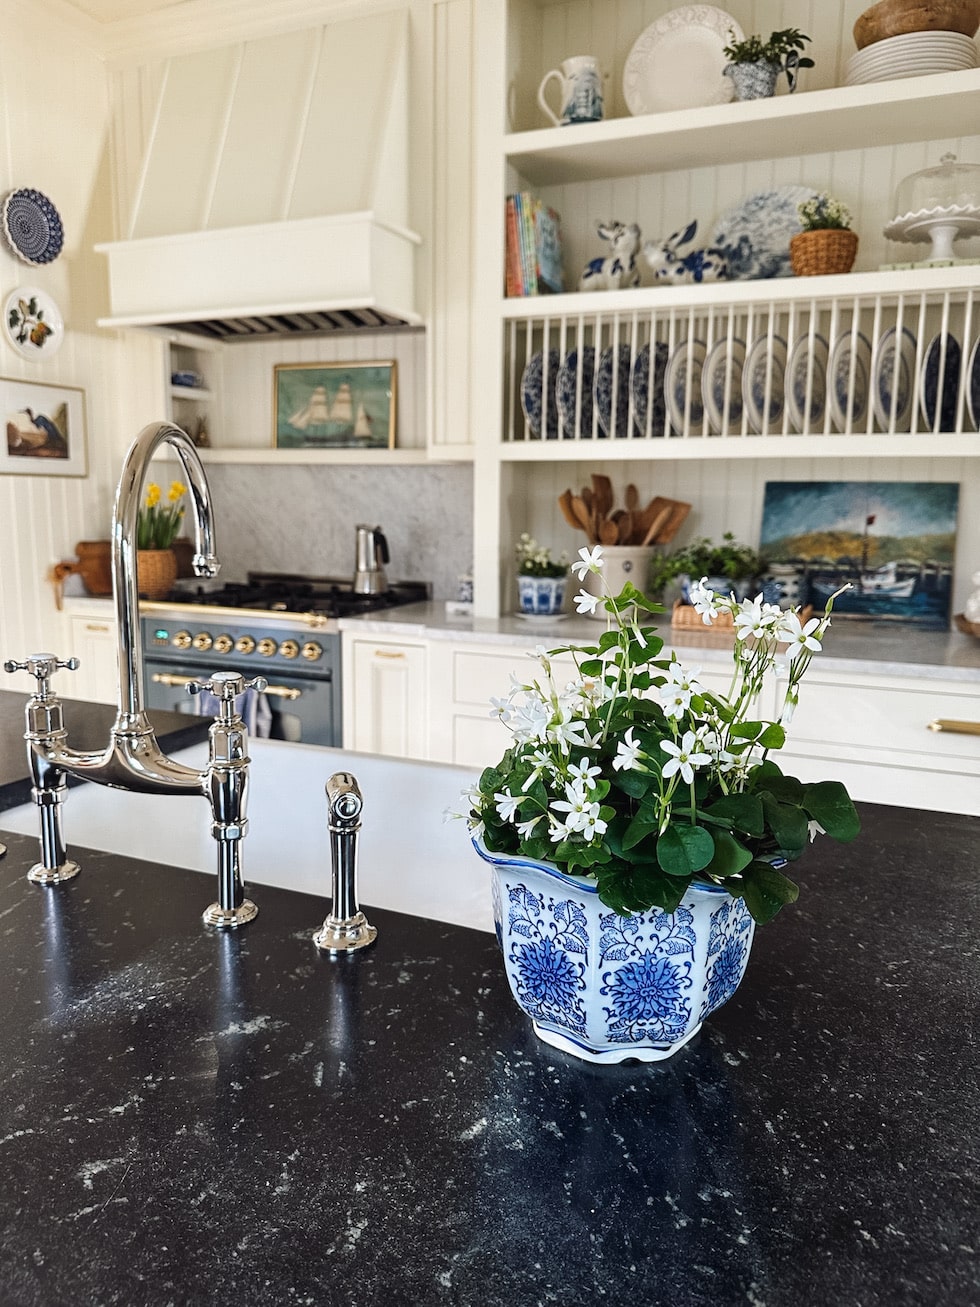 5 Simple Spring Decorating Ideas for the Kitchen